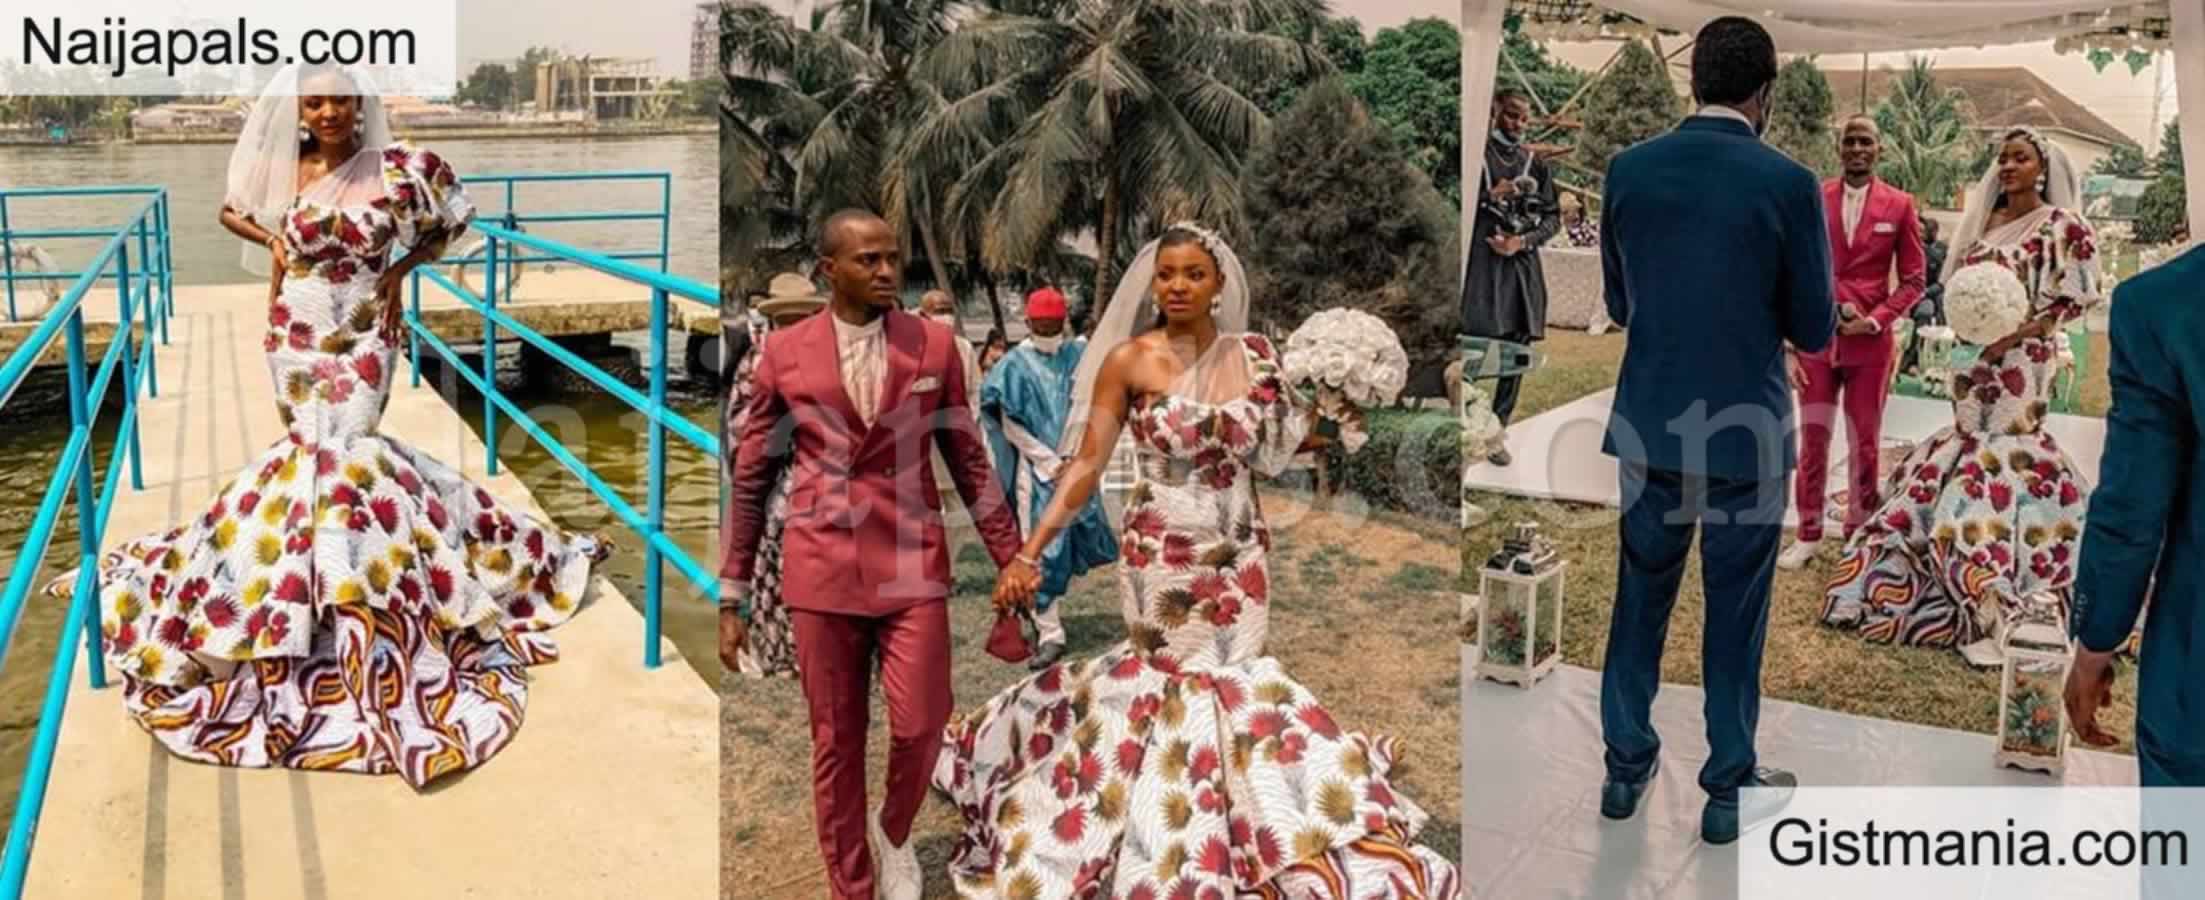 25 Most Trending Ankara Styles for Wedding Guests- Best Dresses for 2022 |  Trendy ankara styles, Ankara styles, Combination fashion